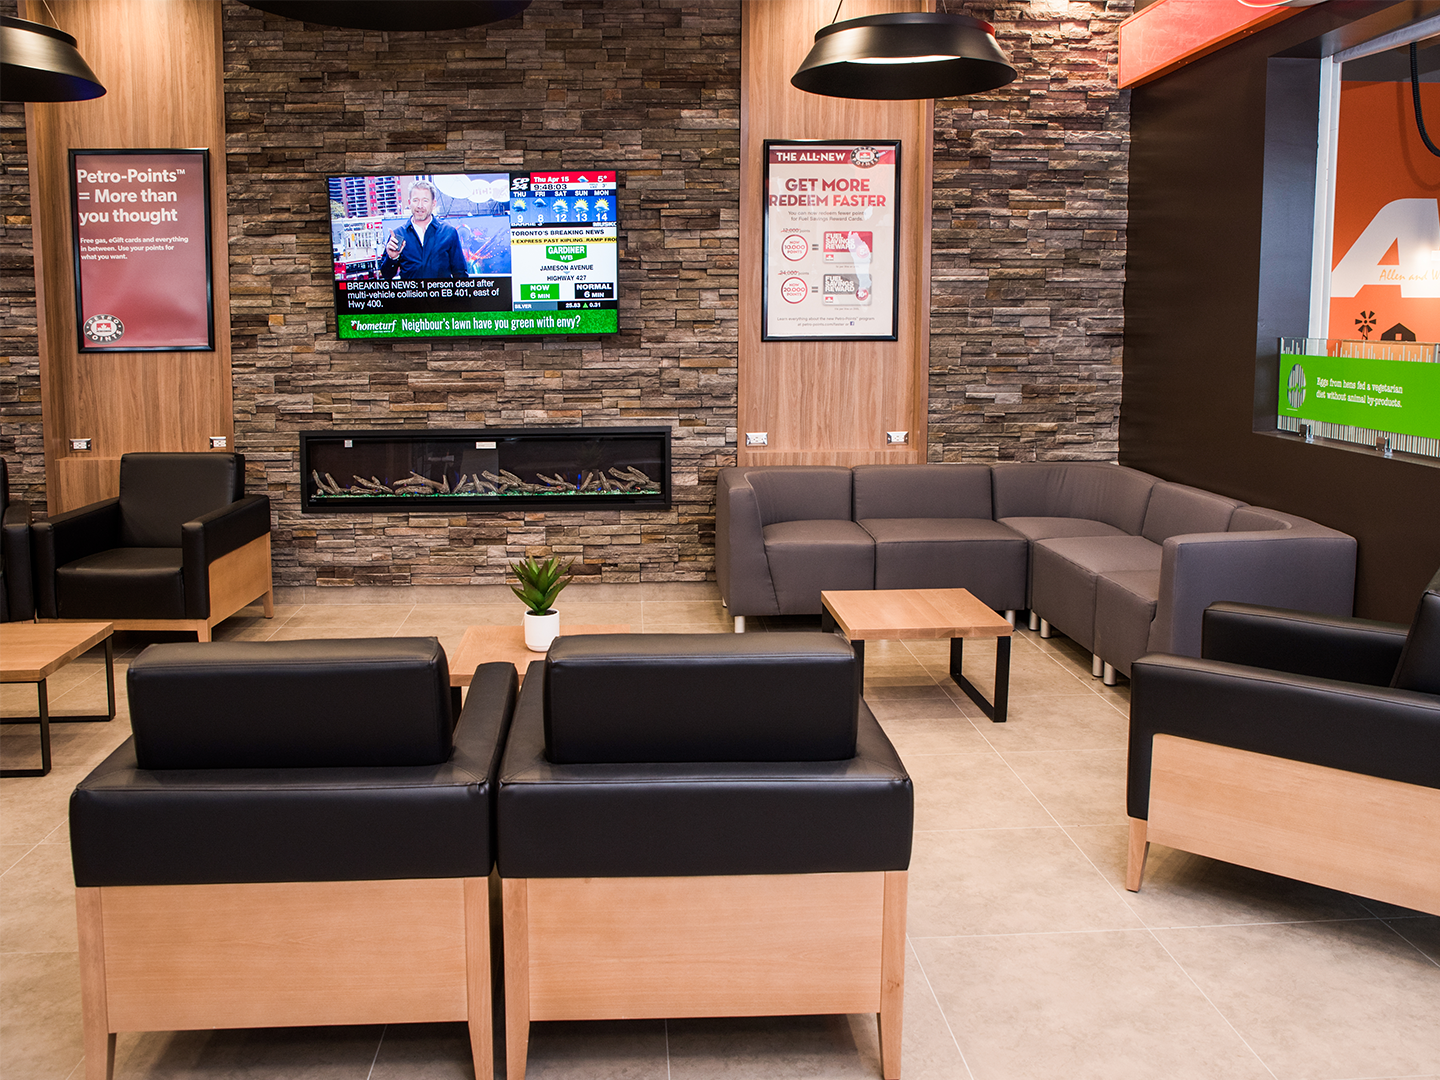 Petro Canada - Custom Furniture for Lounge Area - Custom Couch and Coffee Table - C-Store Display - Convenience Store